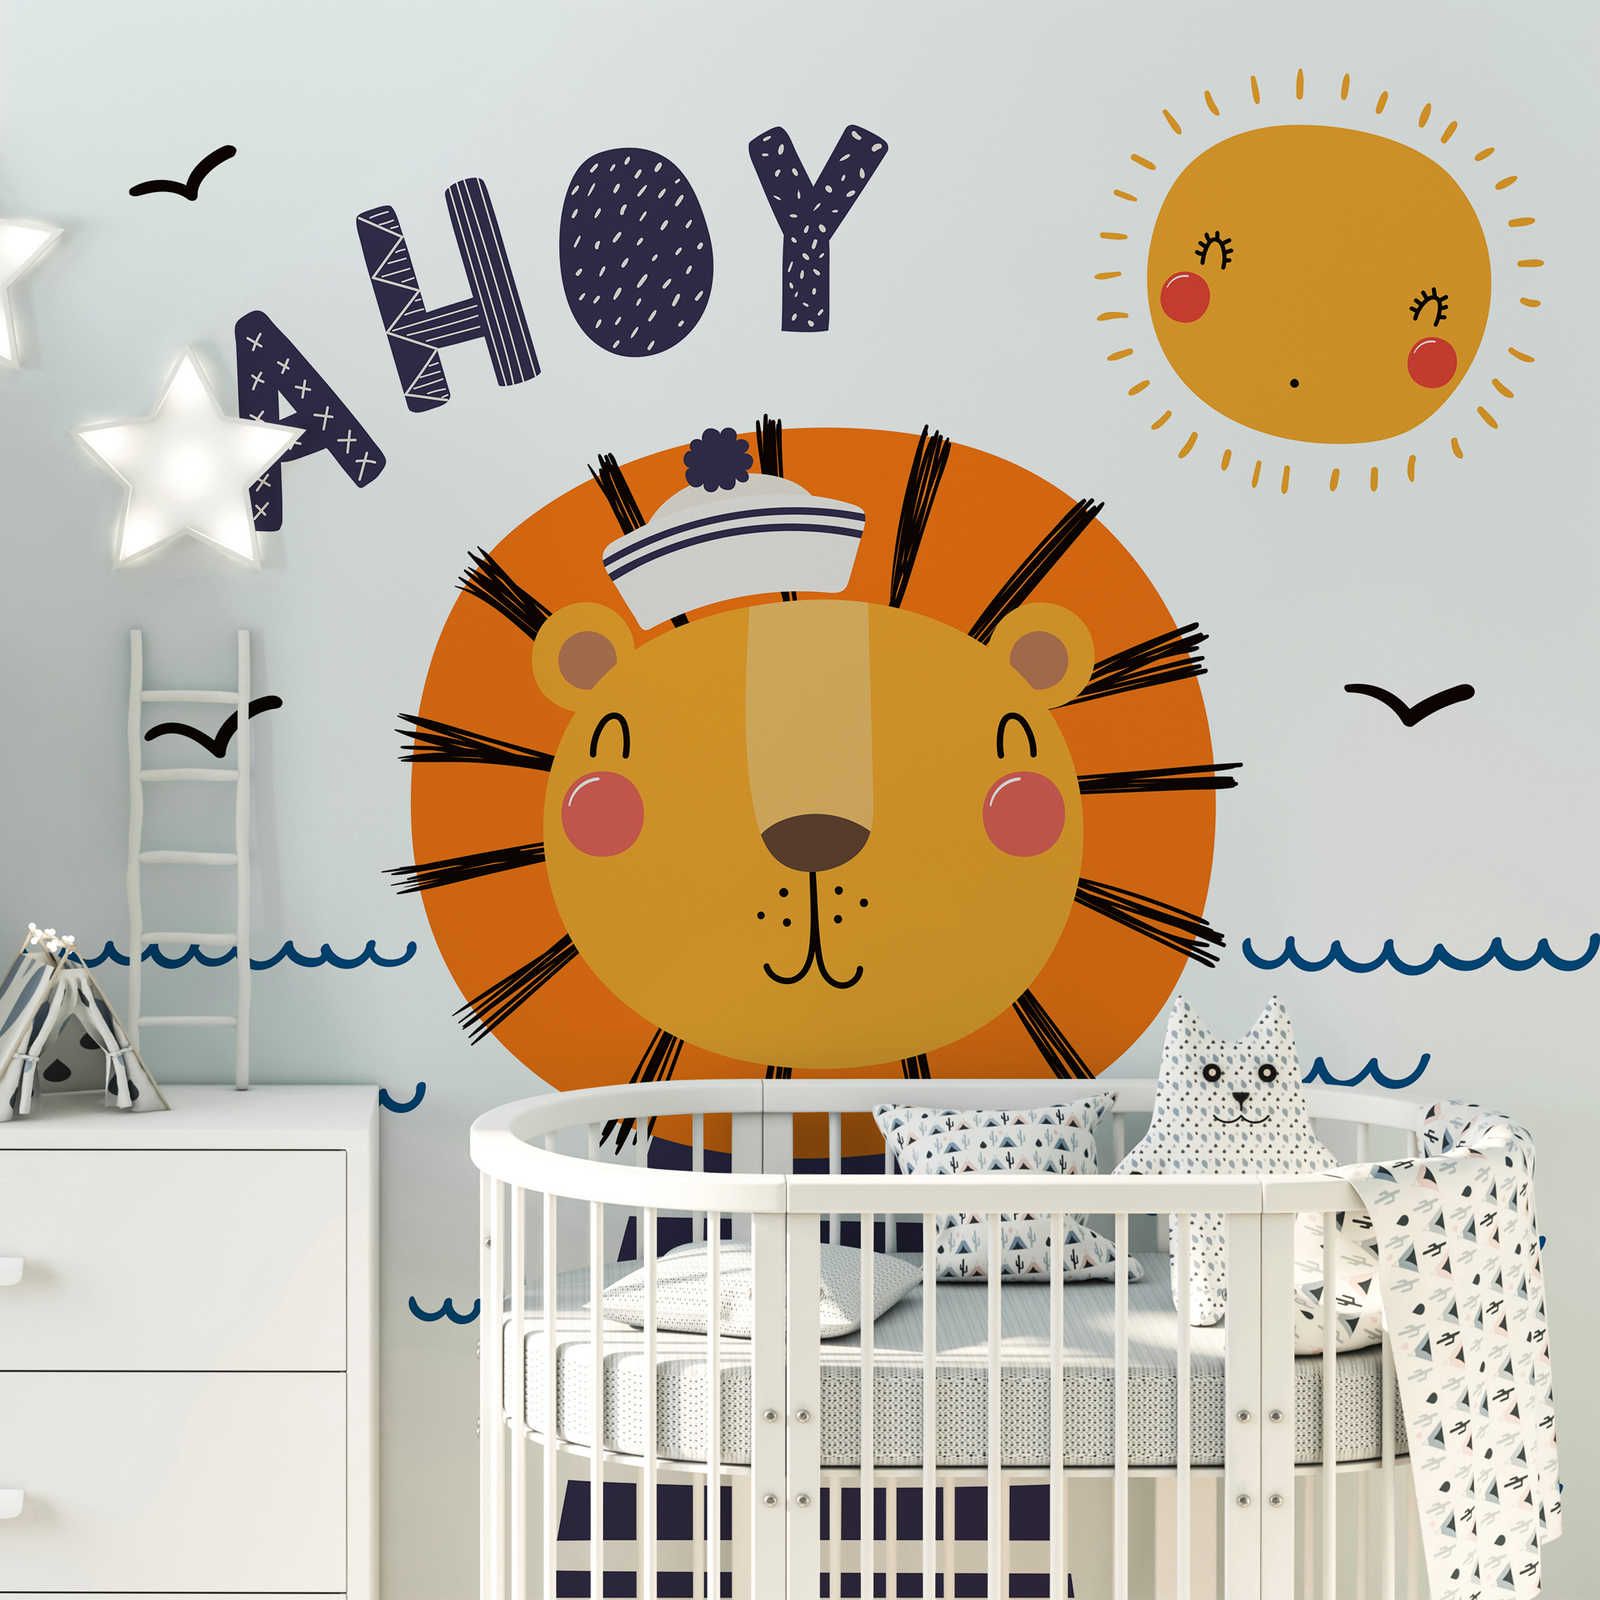 Children's Room Wallpaper with Lion Pirate - Textured non-woven
